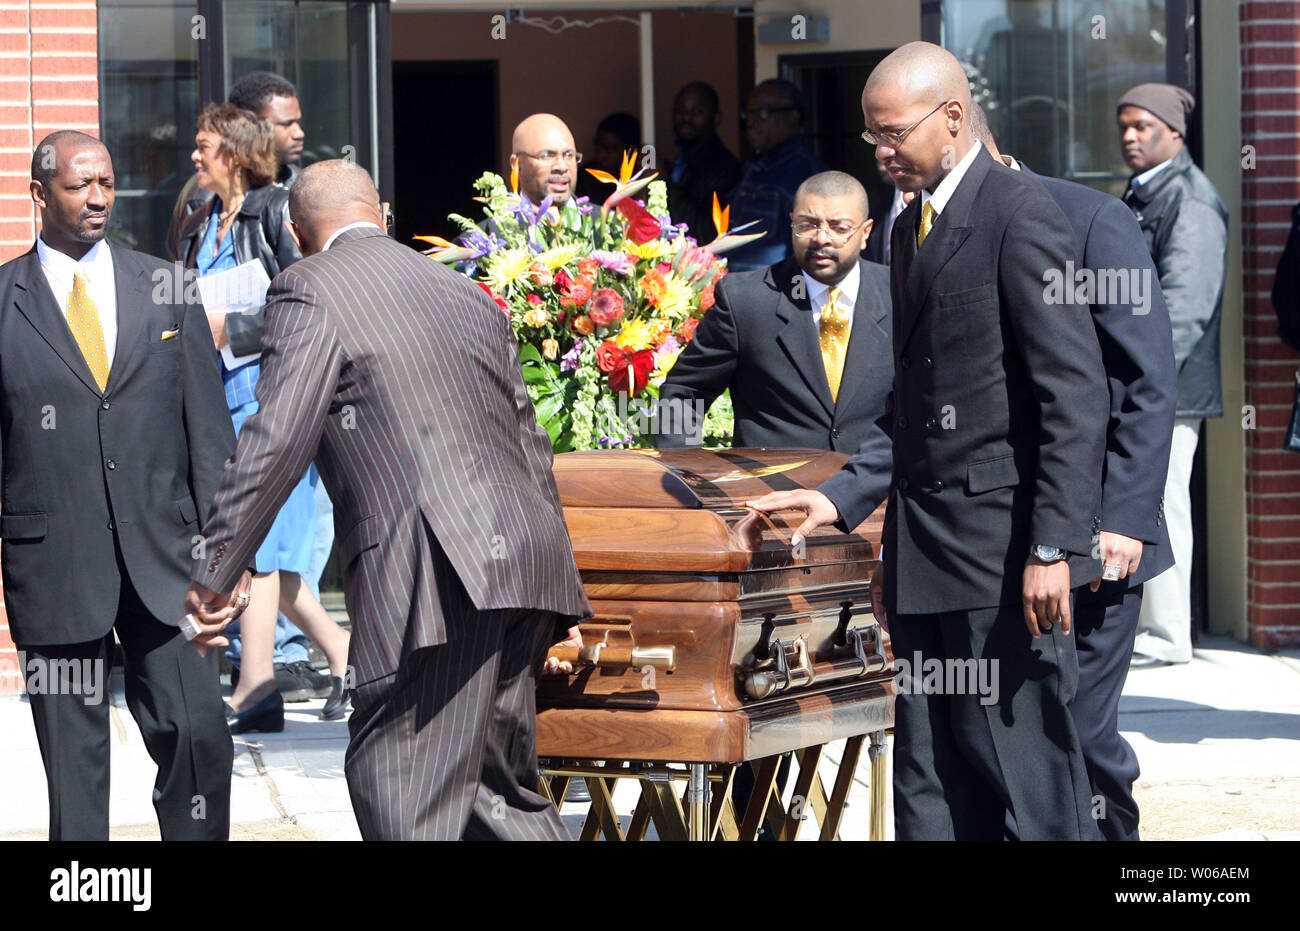 Pallbearers wheel the casket of Denver Broncos running back Damien Nash from the Friendly Temple Missionary Baptist Church to a horsedrawn carriage for the three mile trip to a cemetery in St .Louis on March 5, 2007. Nash, 24, who is from St. Louis, died on February 24, after playing in a charity basketball game. (UPI Photo/Bill Greenblatt) Stock Photo